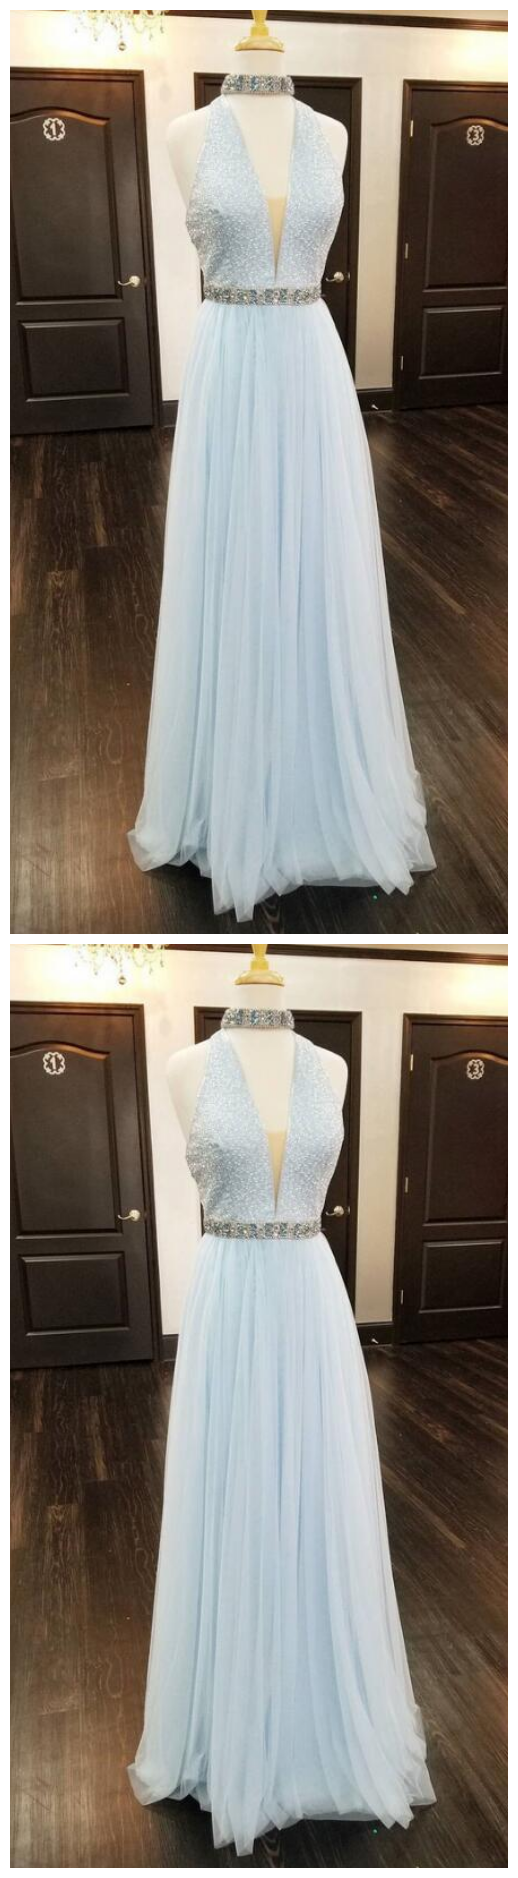 Long A-line Halter Prom Dress, Evening Dresses ,sexy Formal Gowns Backlessprom Dress, Party Graduation Dresses With Beads For Teens